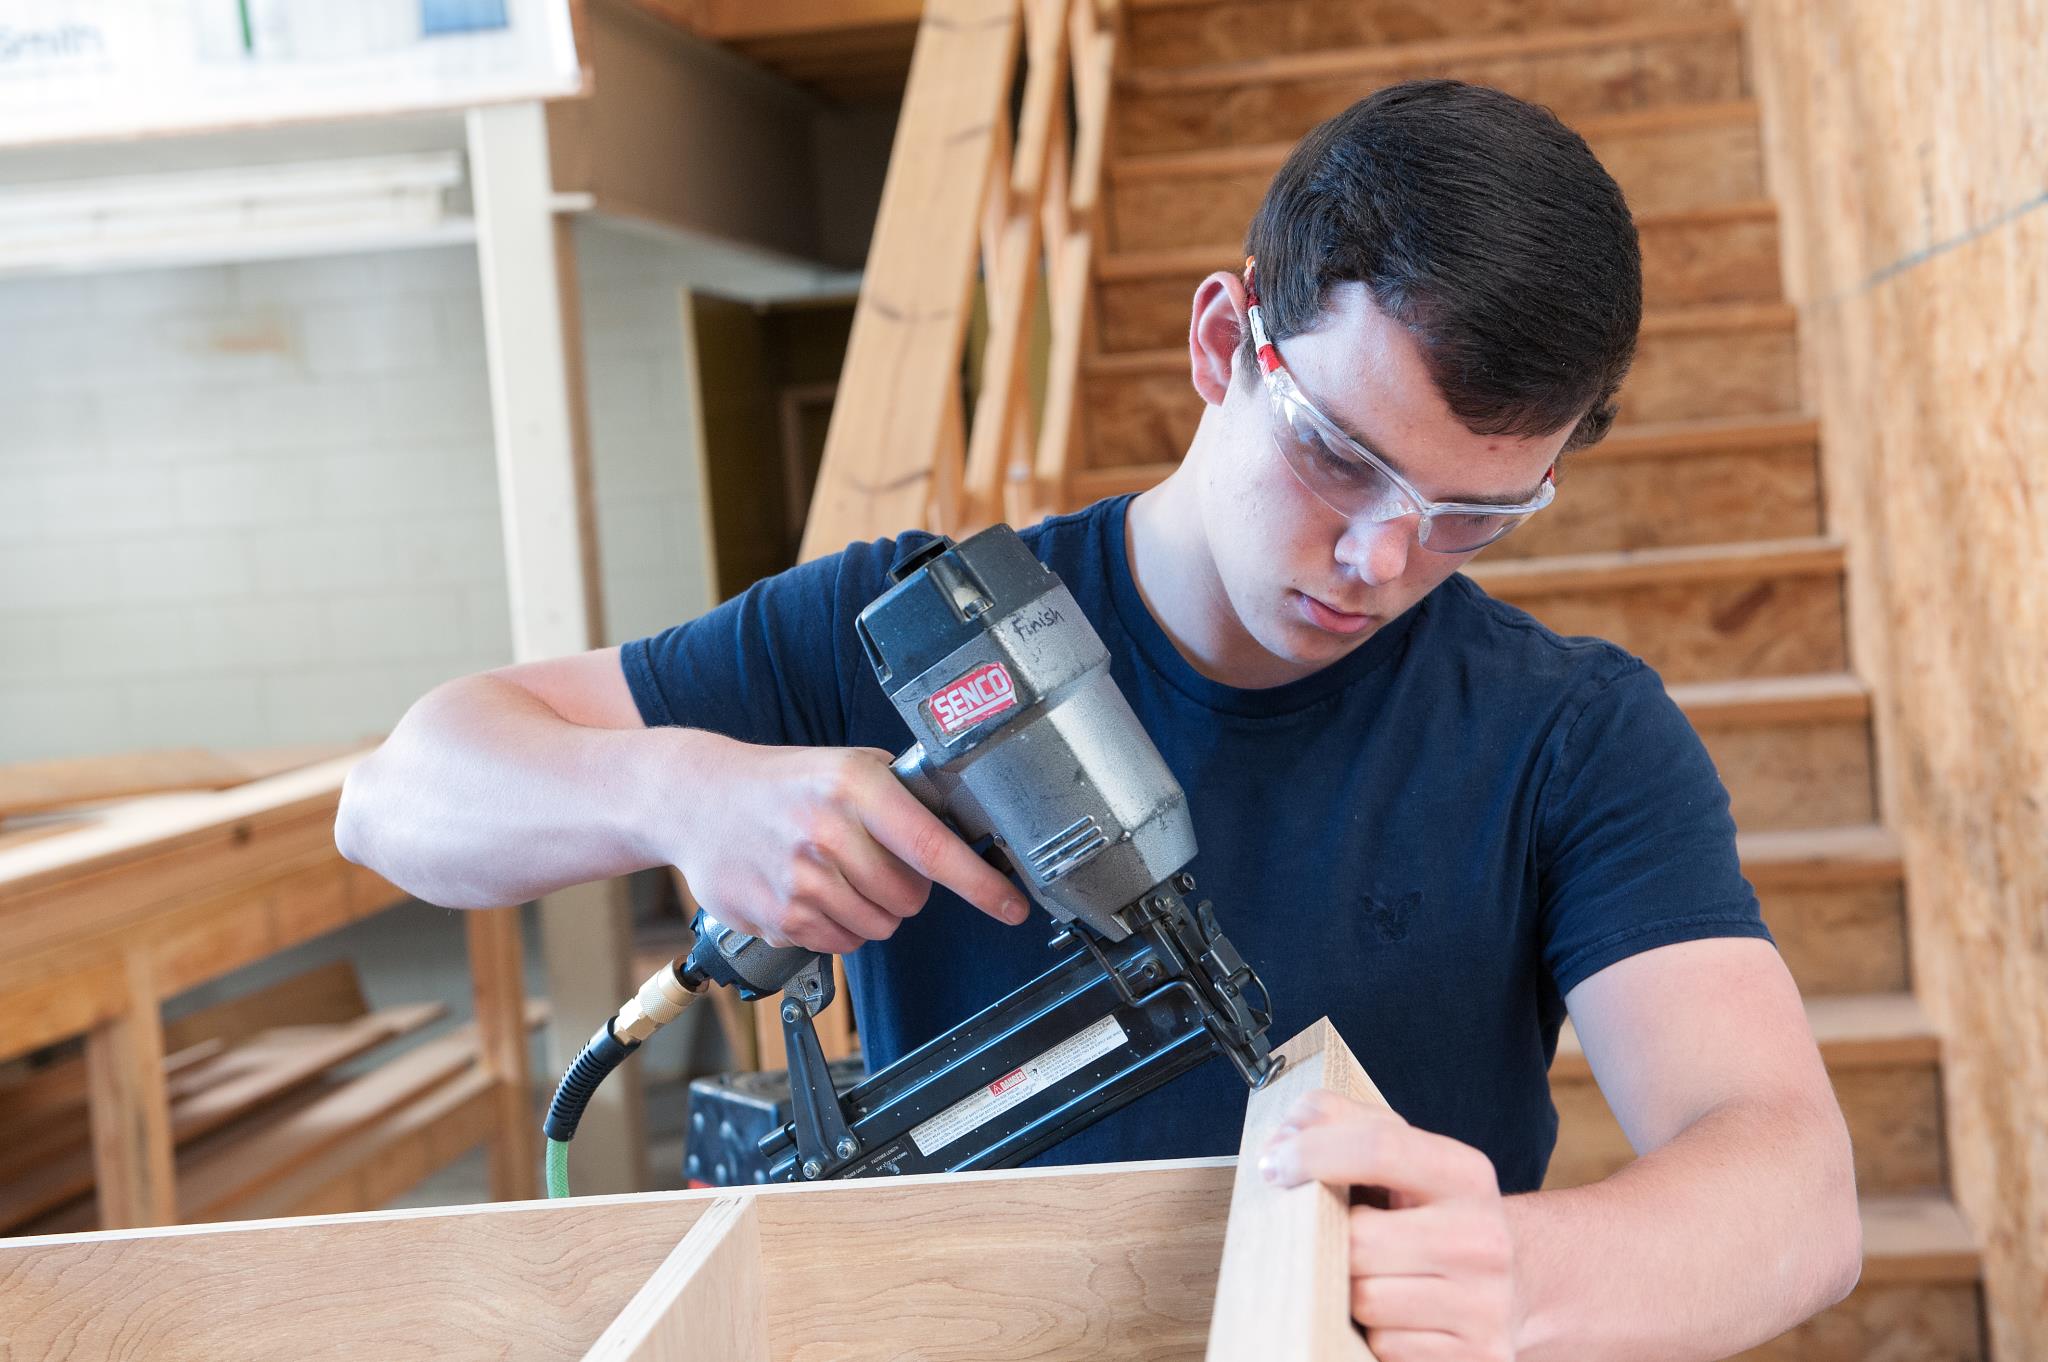 Male construction student uses a drill on a piece of wood